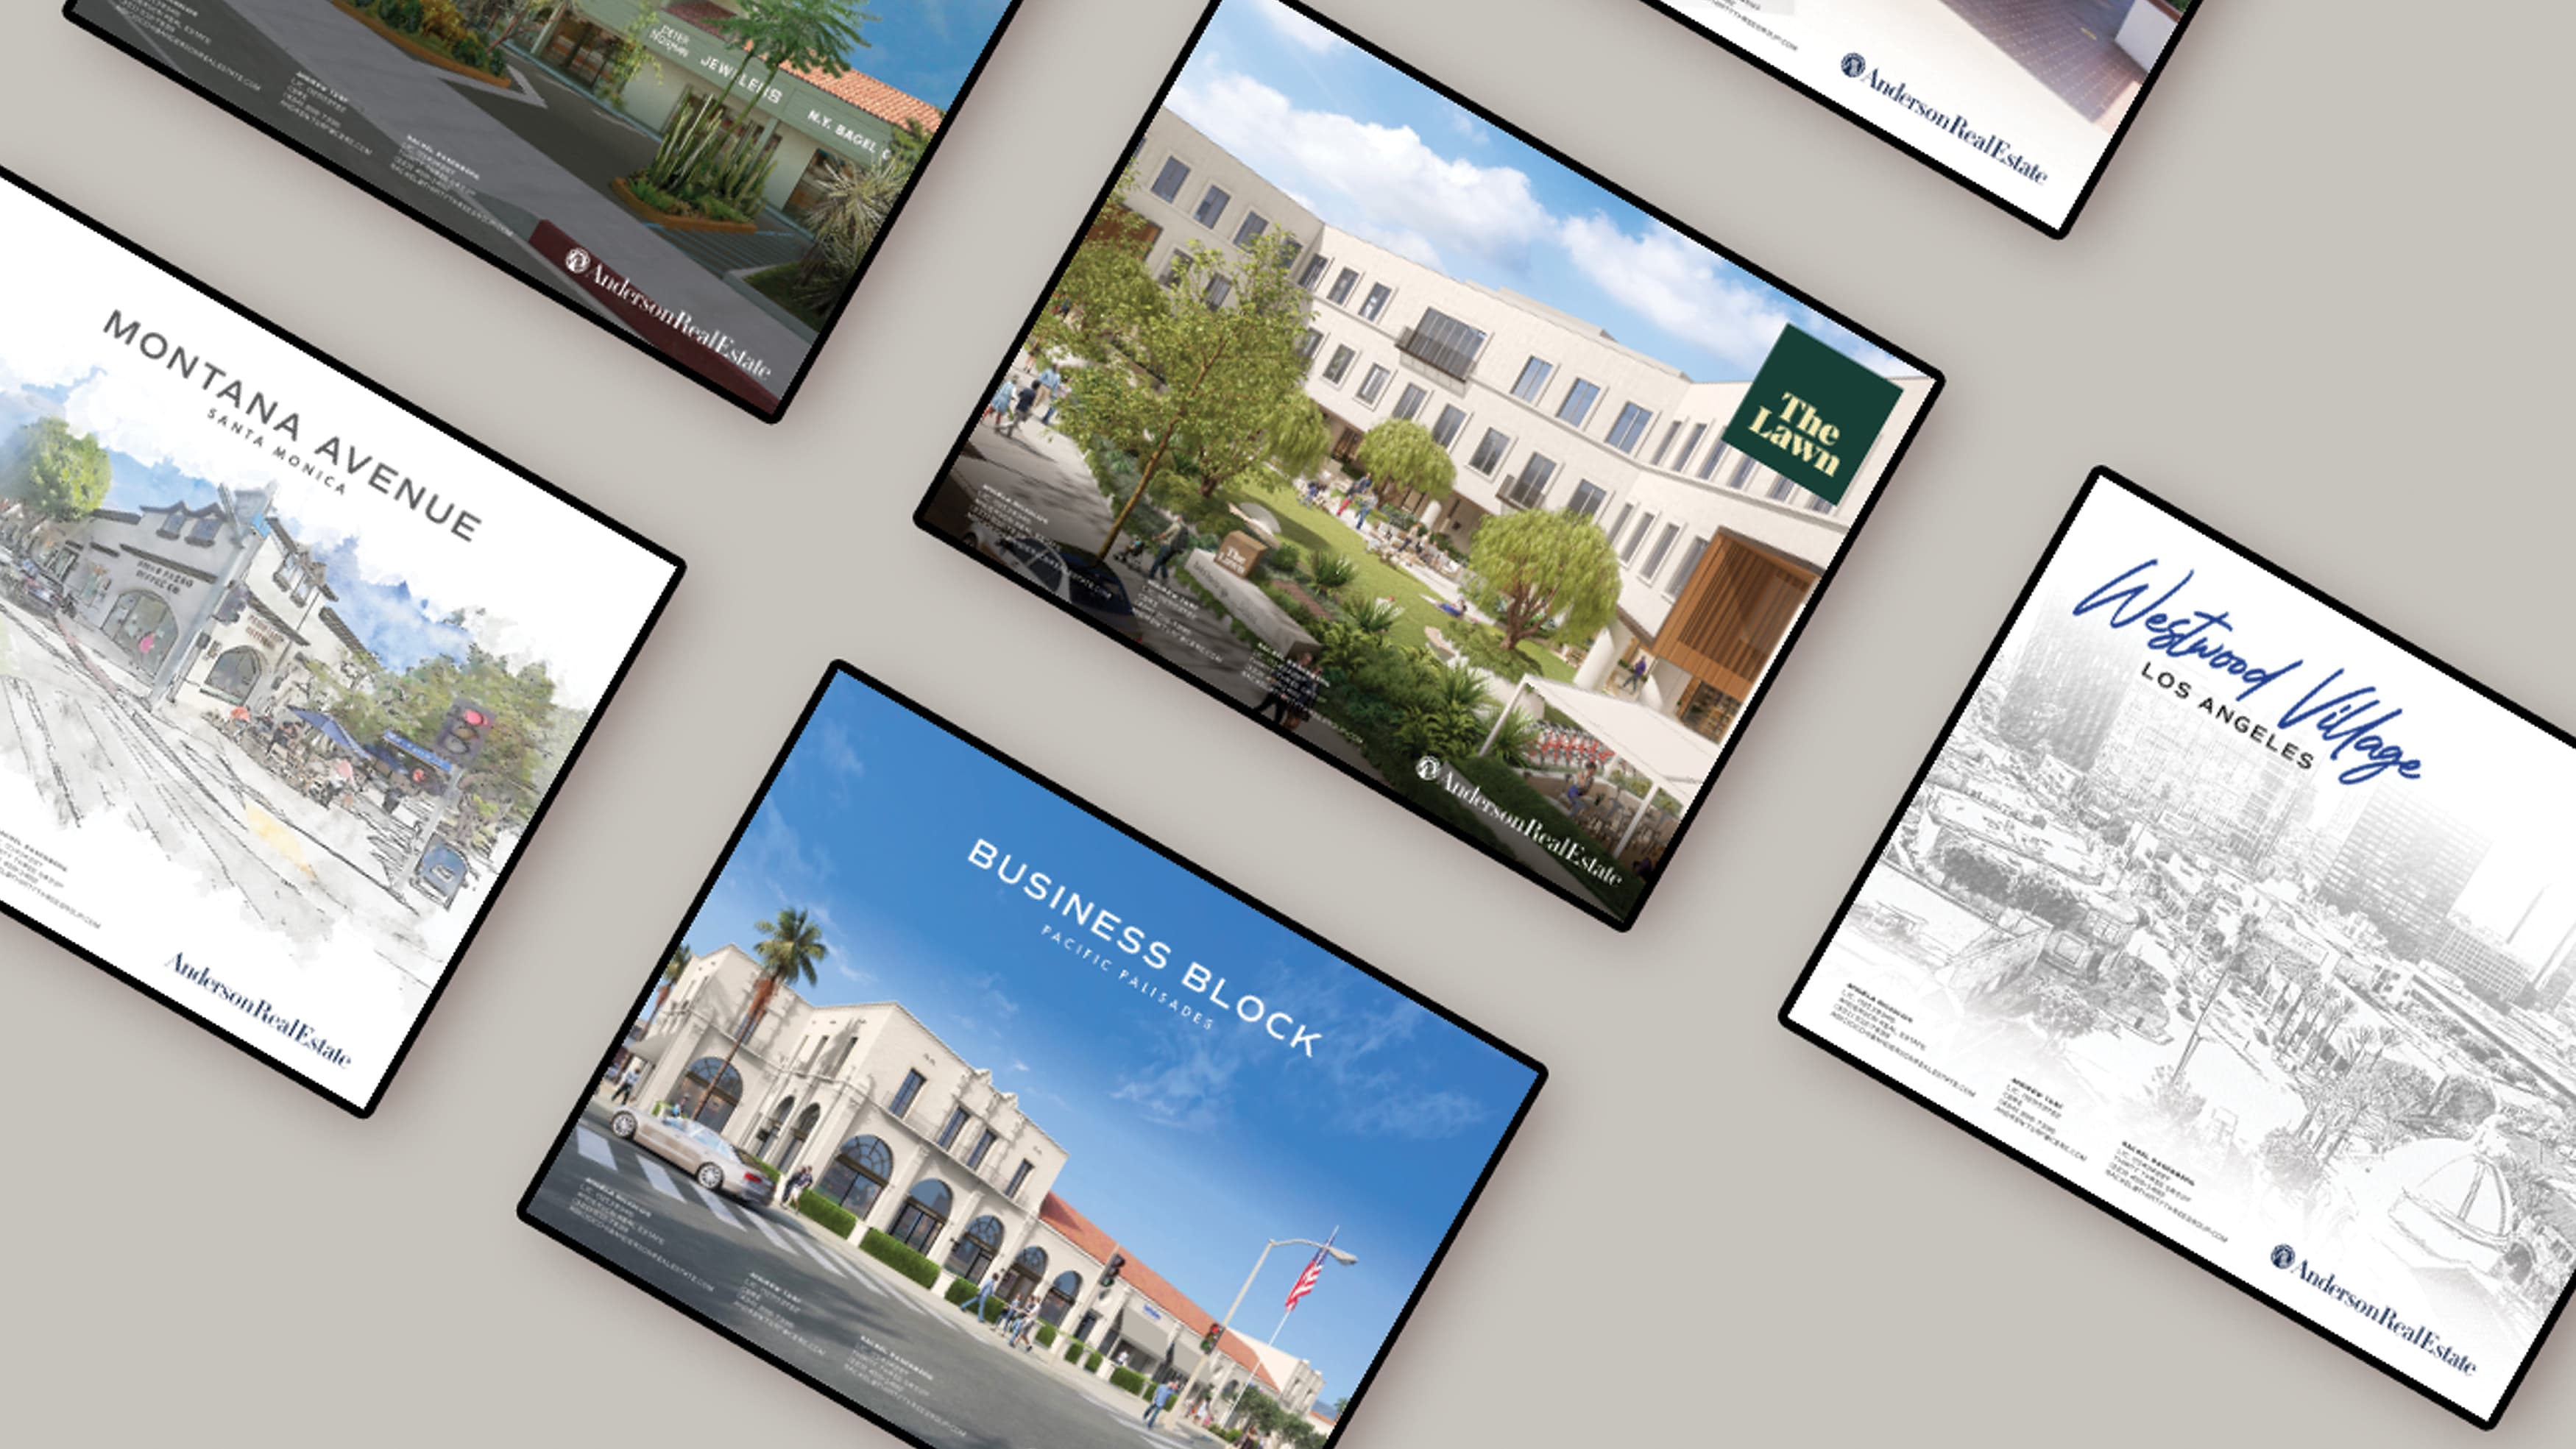 Mockup of leasing brochures for a real estate company on ipads on a table.